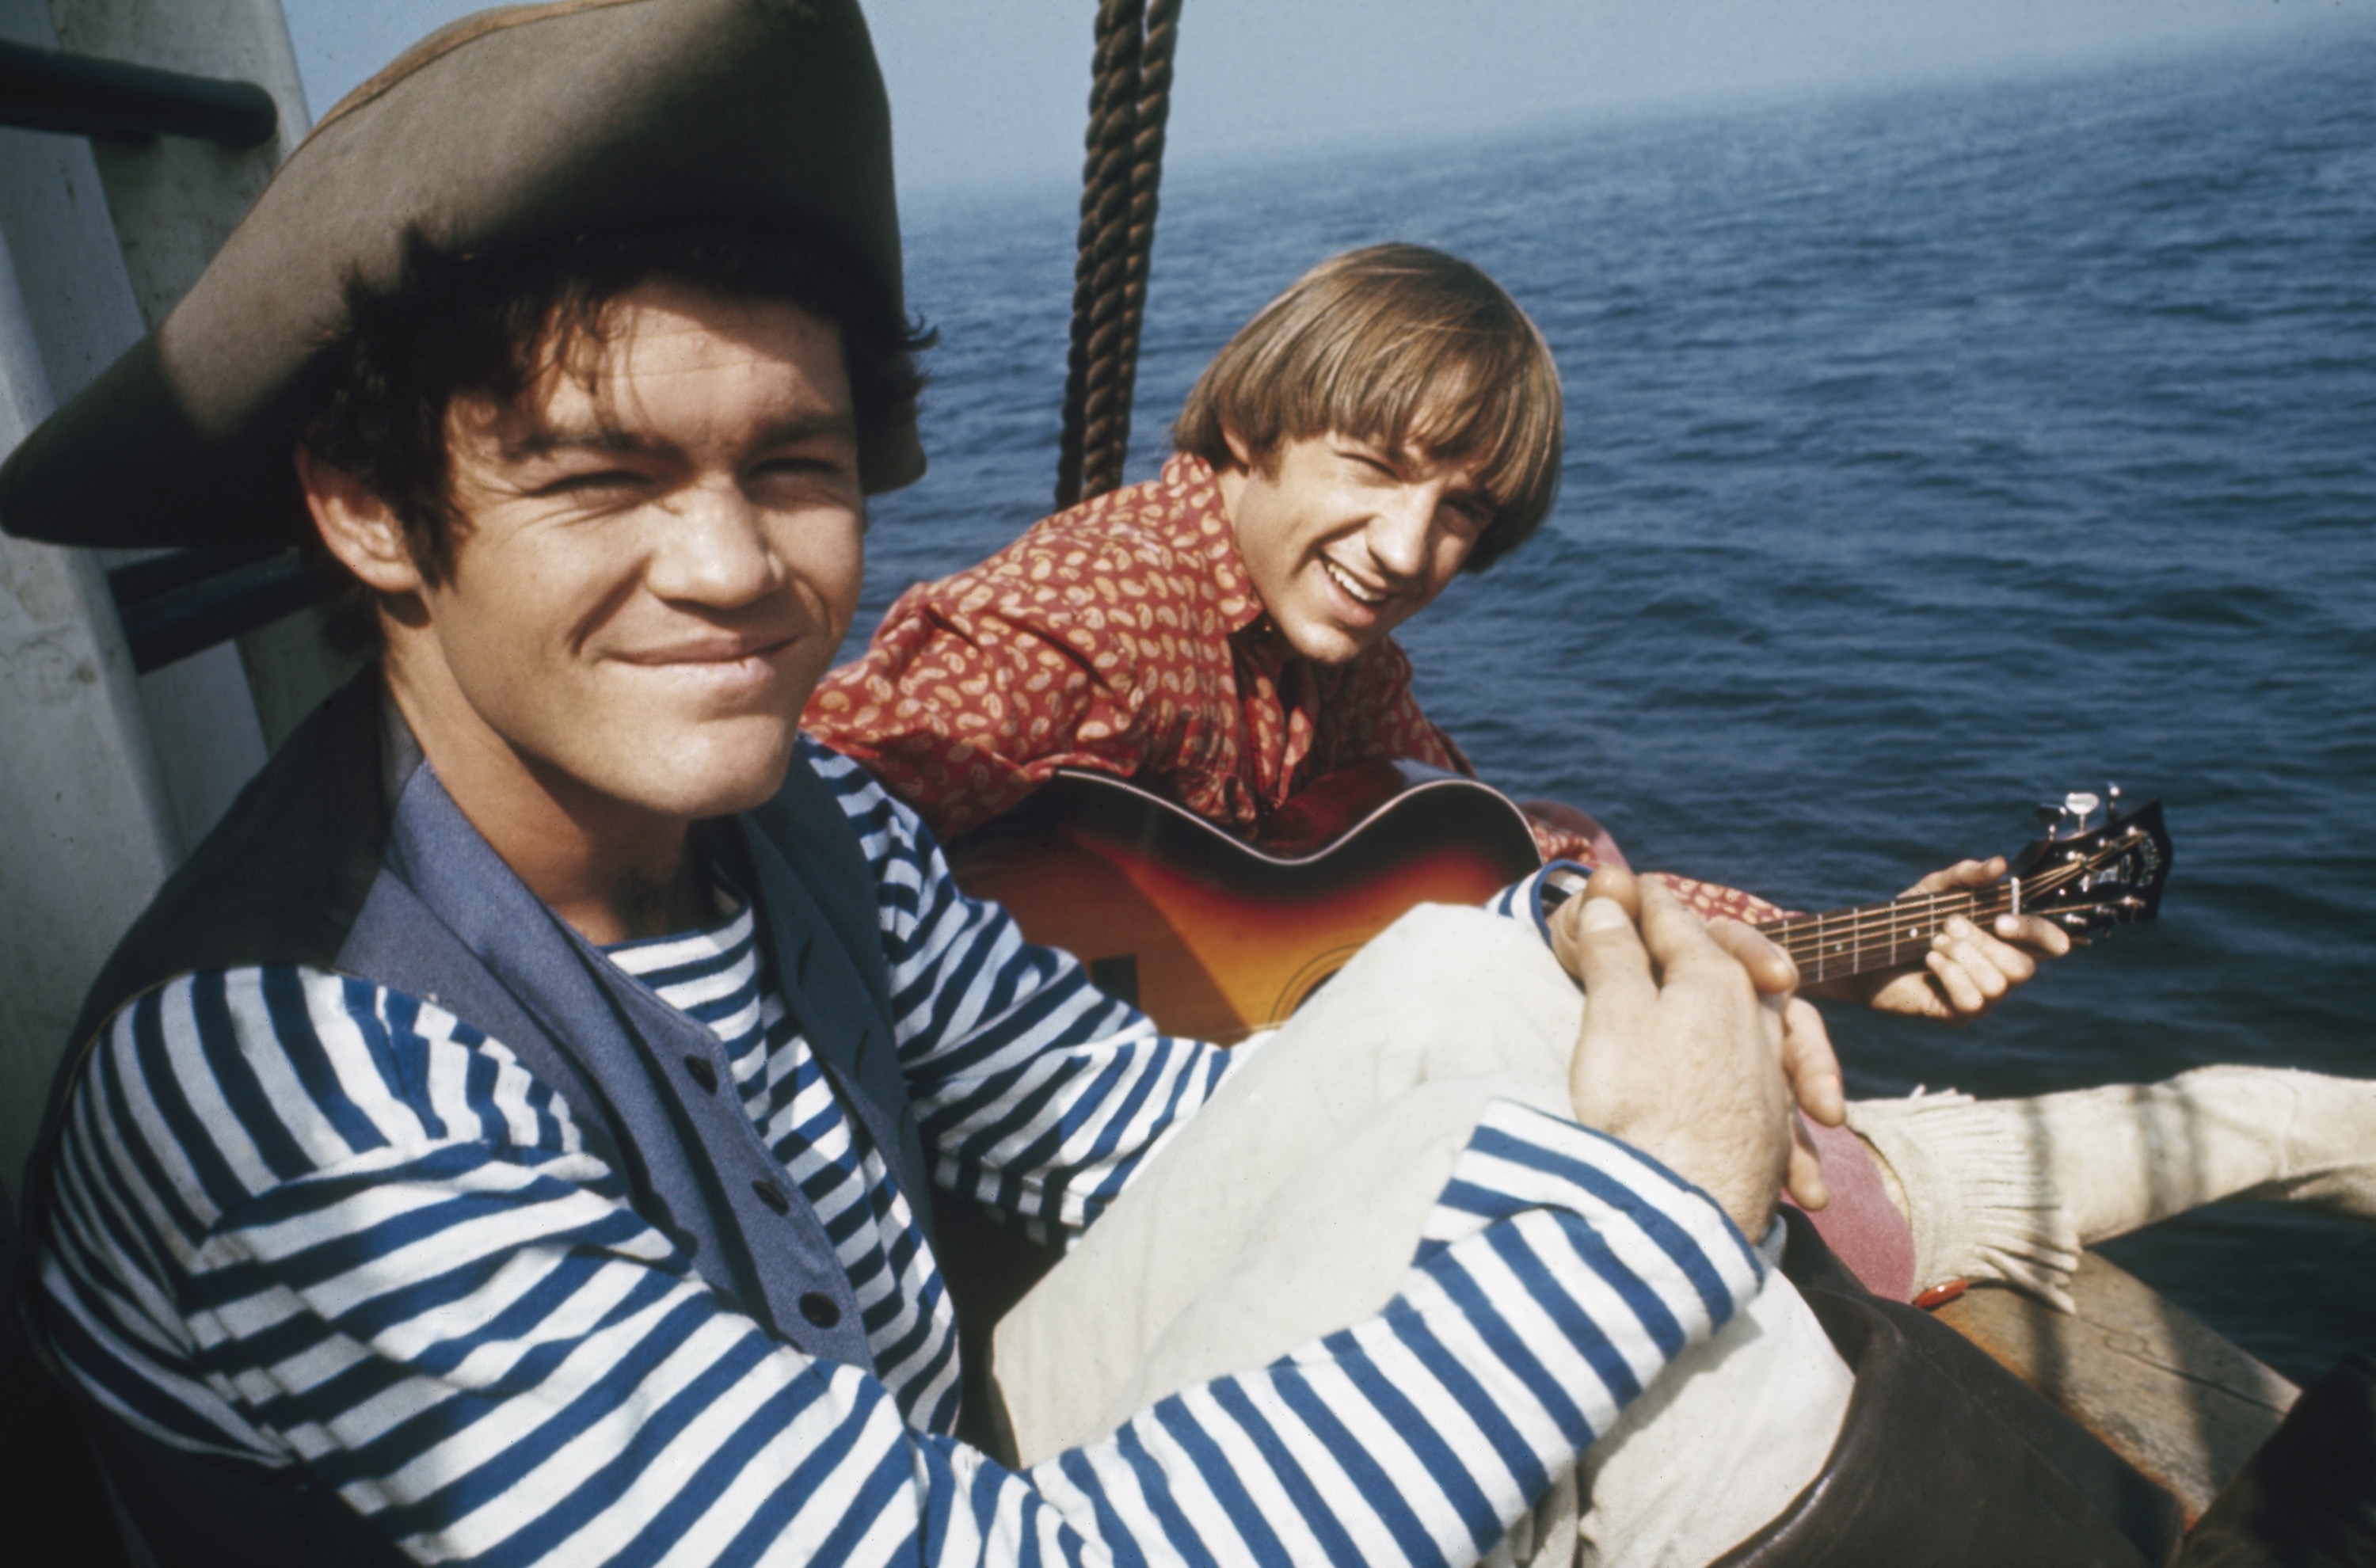 The Monkees' Micky Dolenz and Peter Tork on a boat